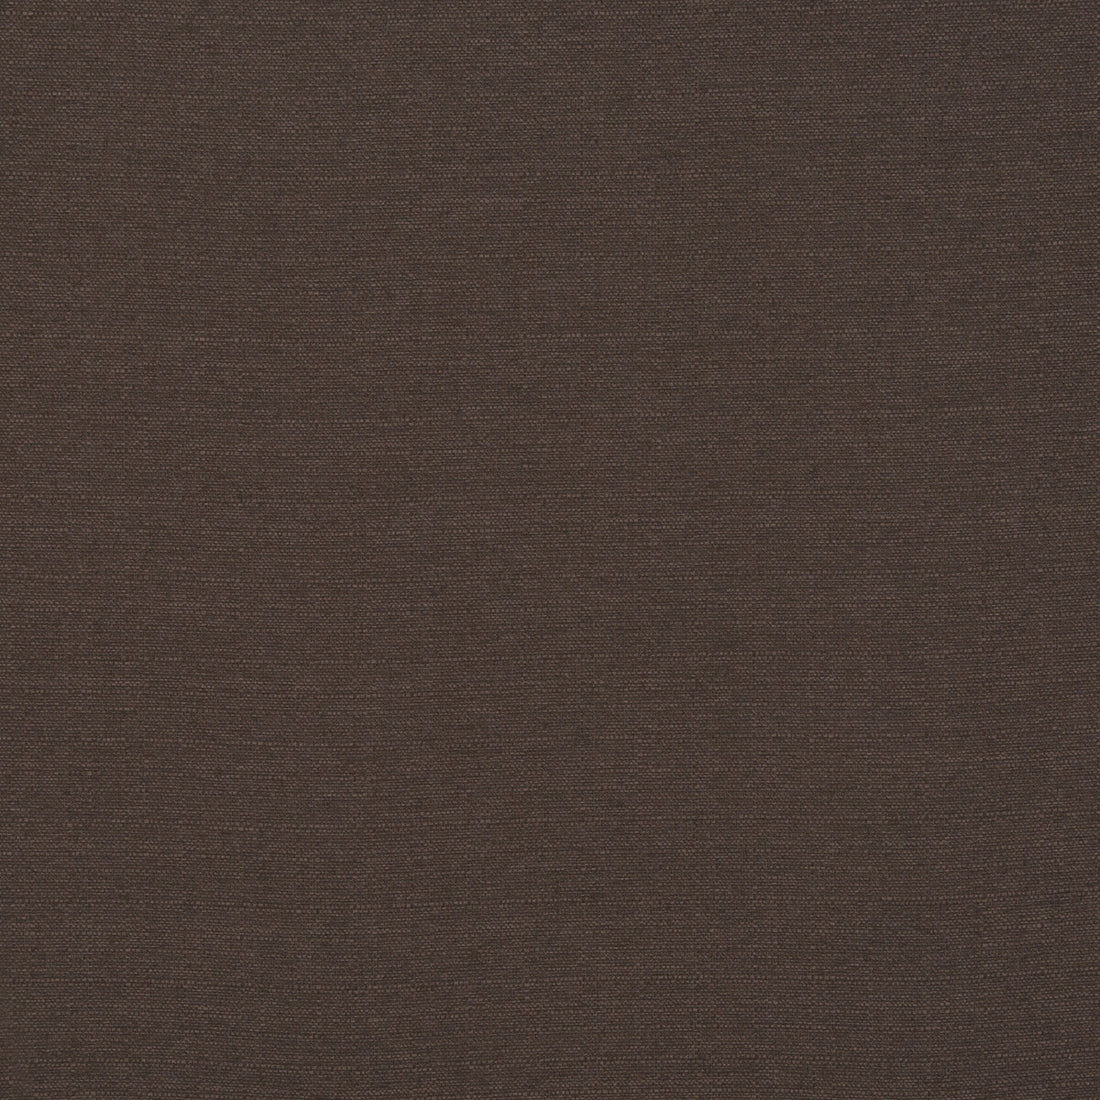 Lansdowne fabric in coffee bean color - pattern PF50413.295.0 - by Baker Lifestyle in the Notebooks collection